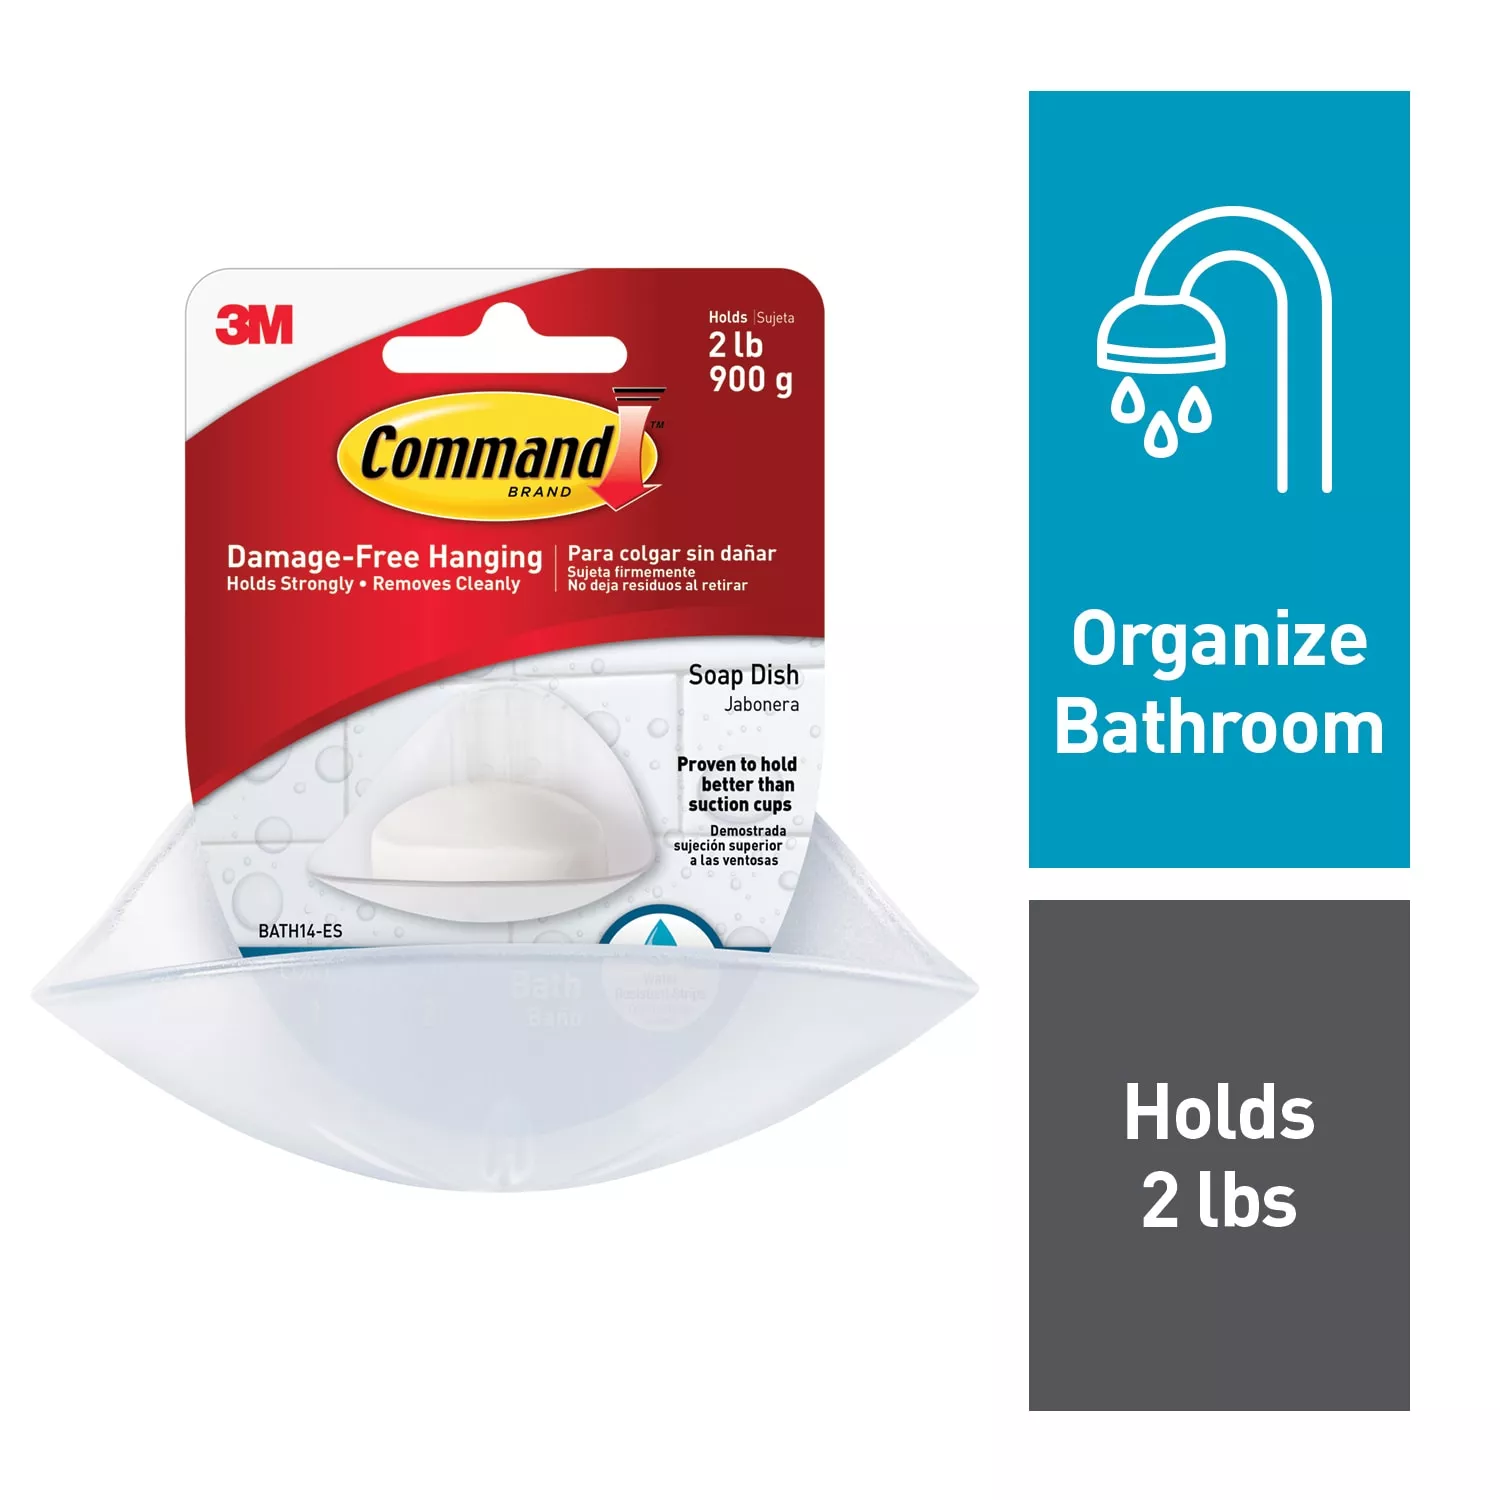 SKU 7000144757 | Command™ Soap Dish with Water-Resistant Strips BATH14-ES